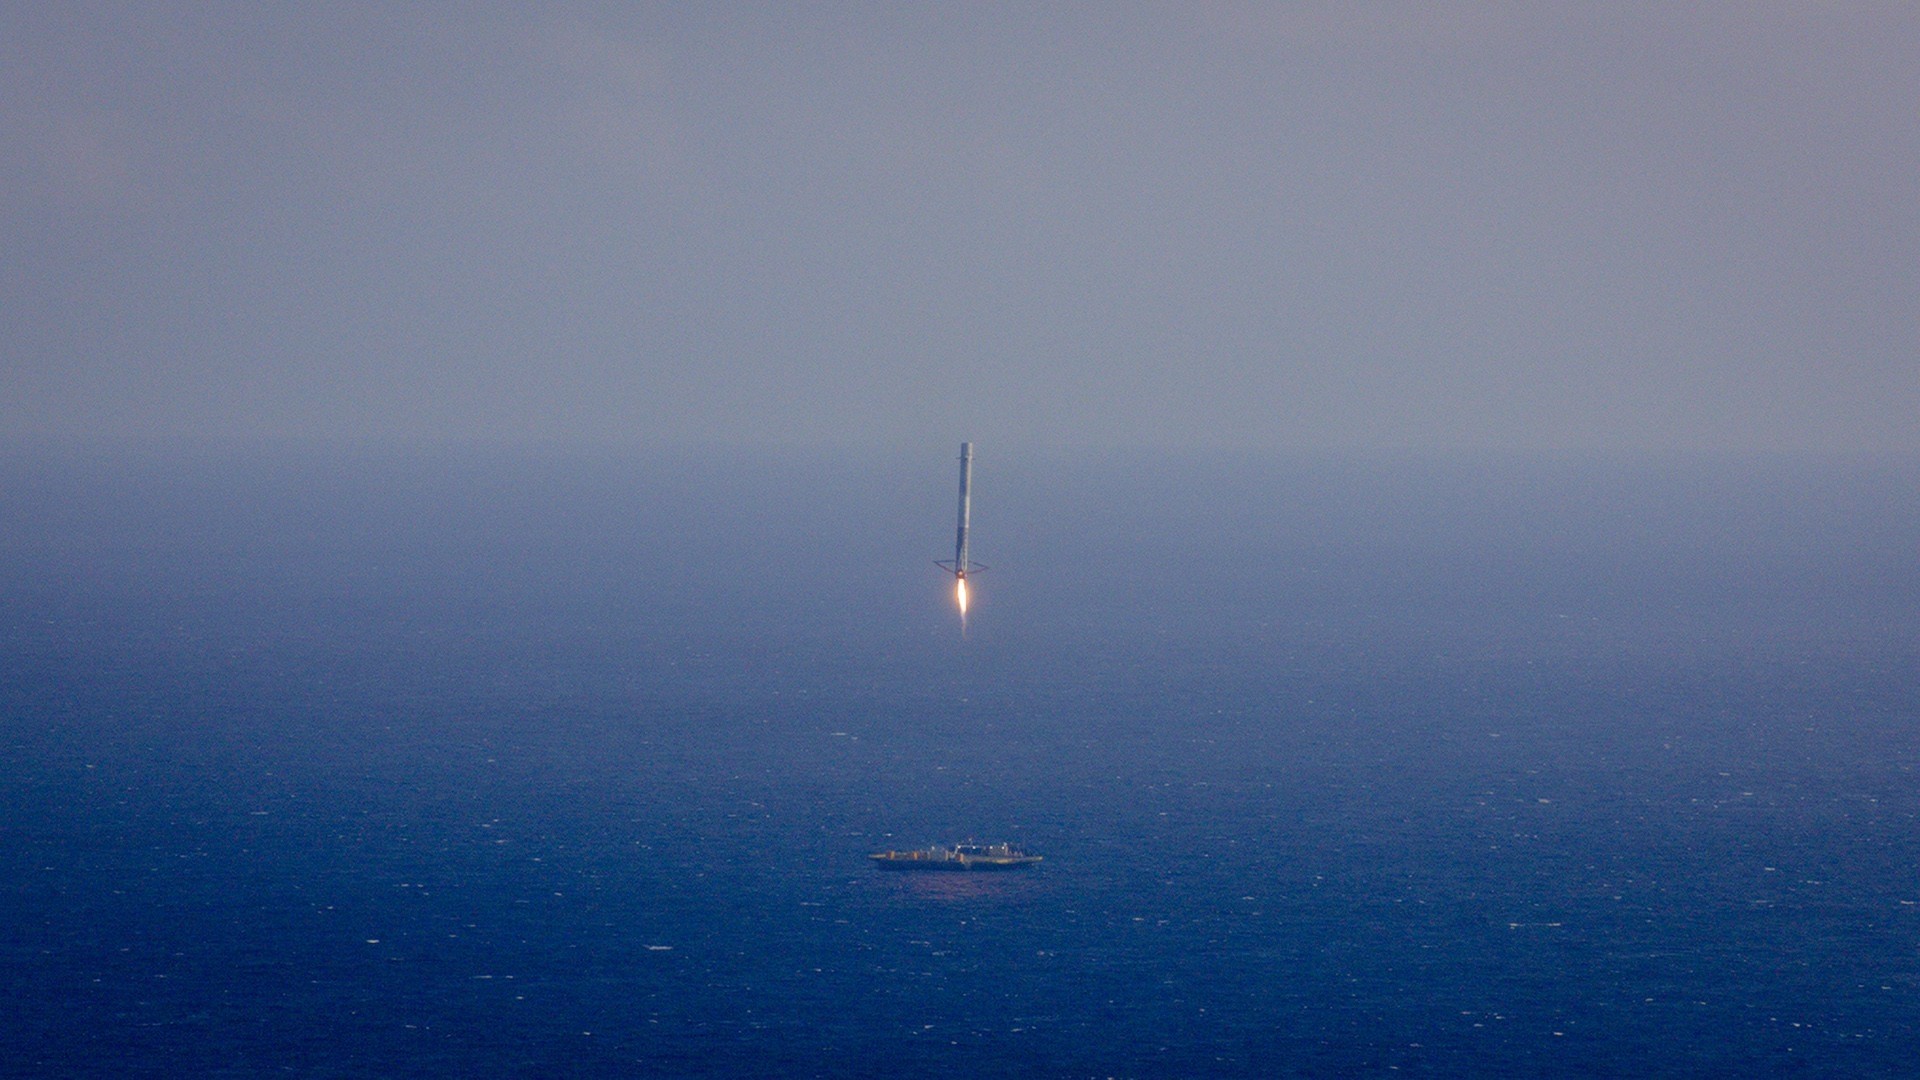 Spacex Wallpaper image hd